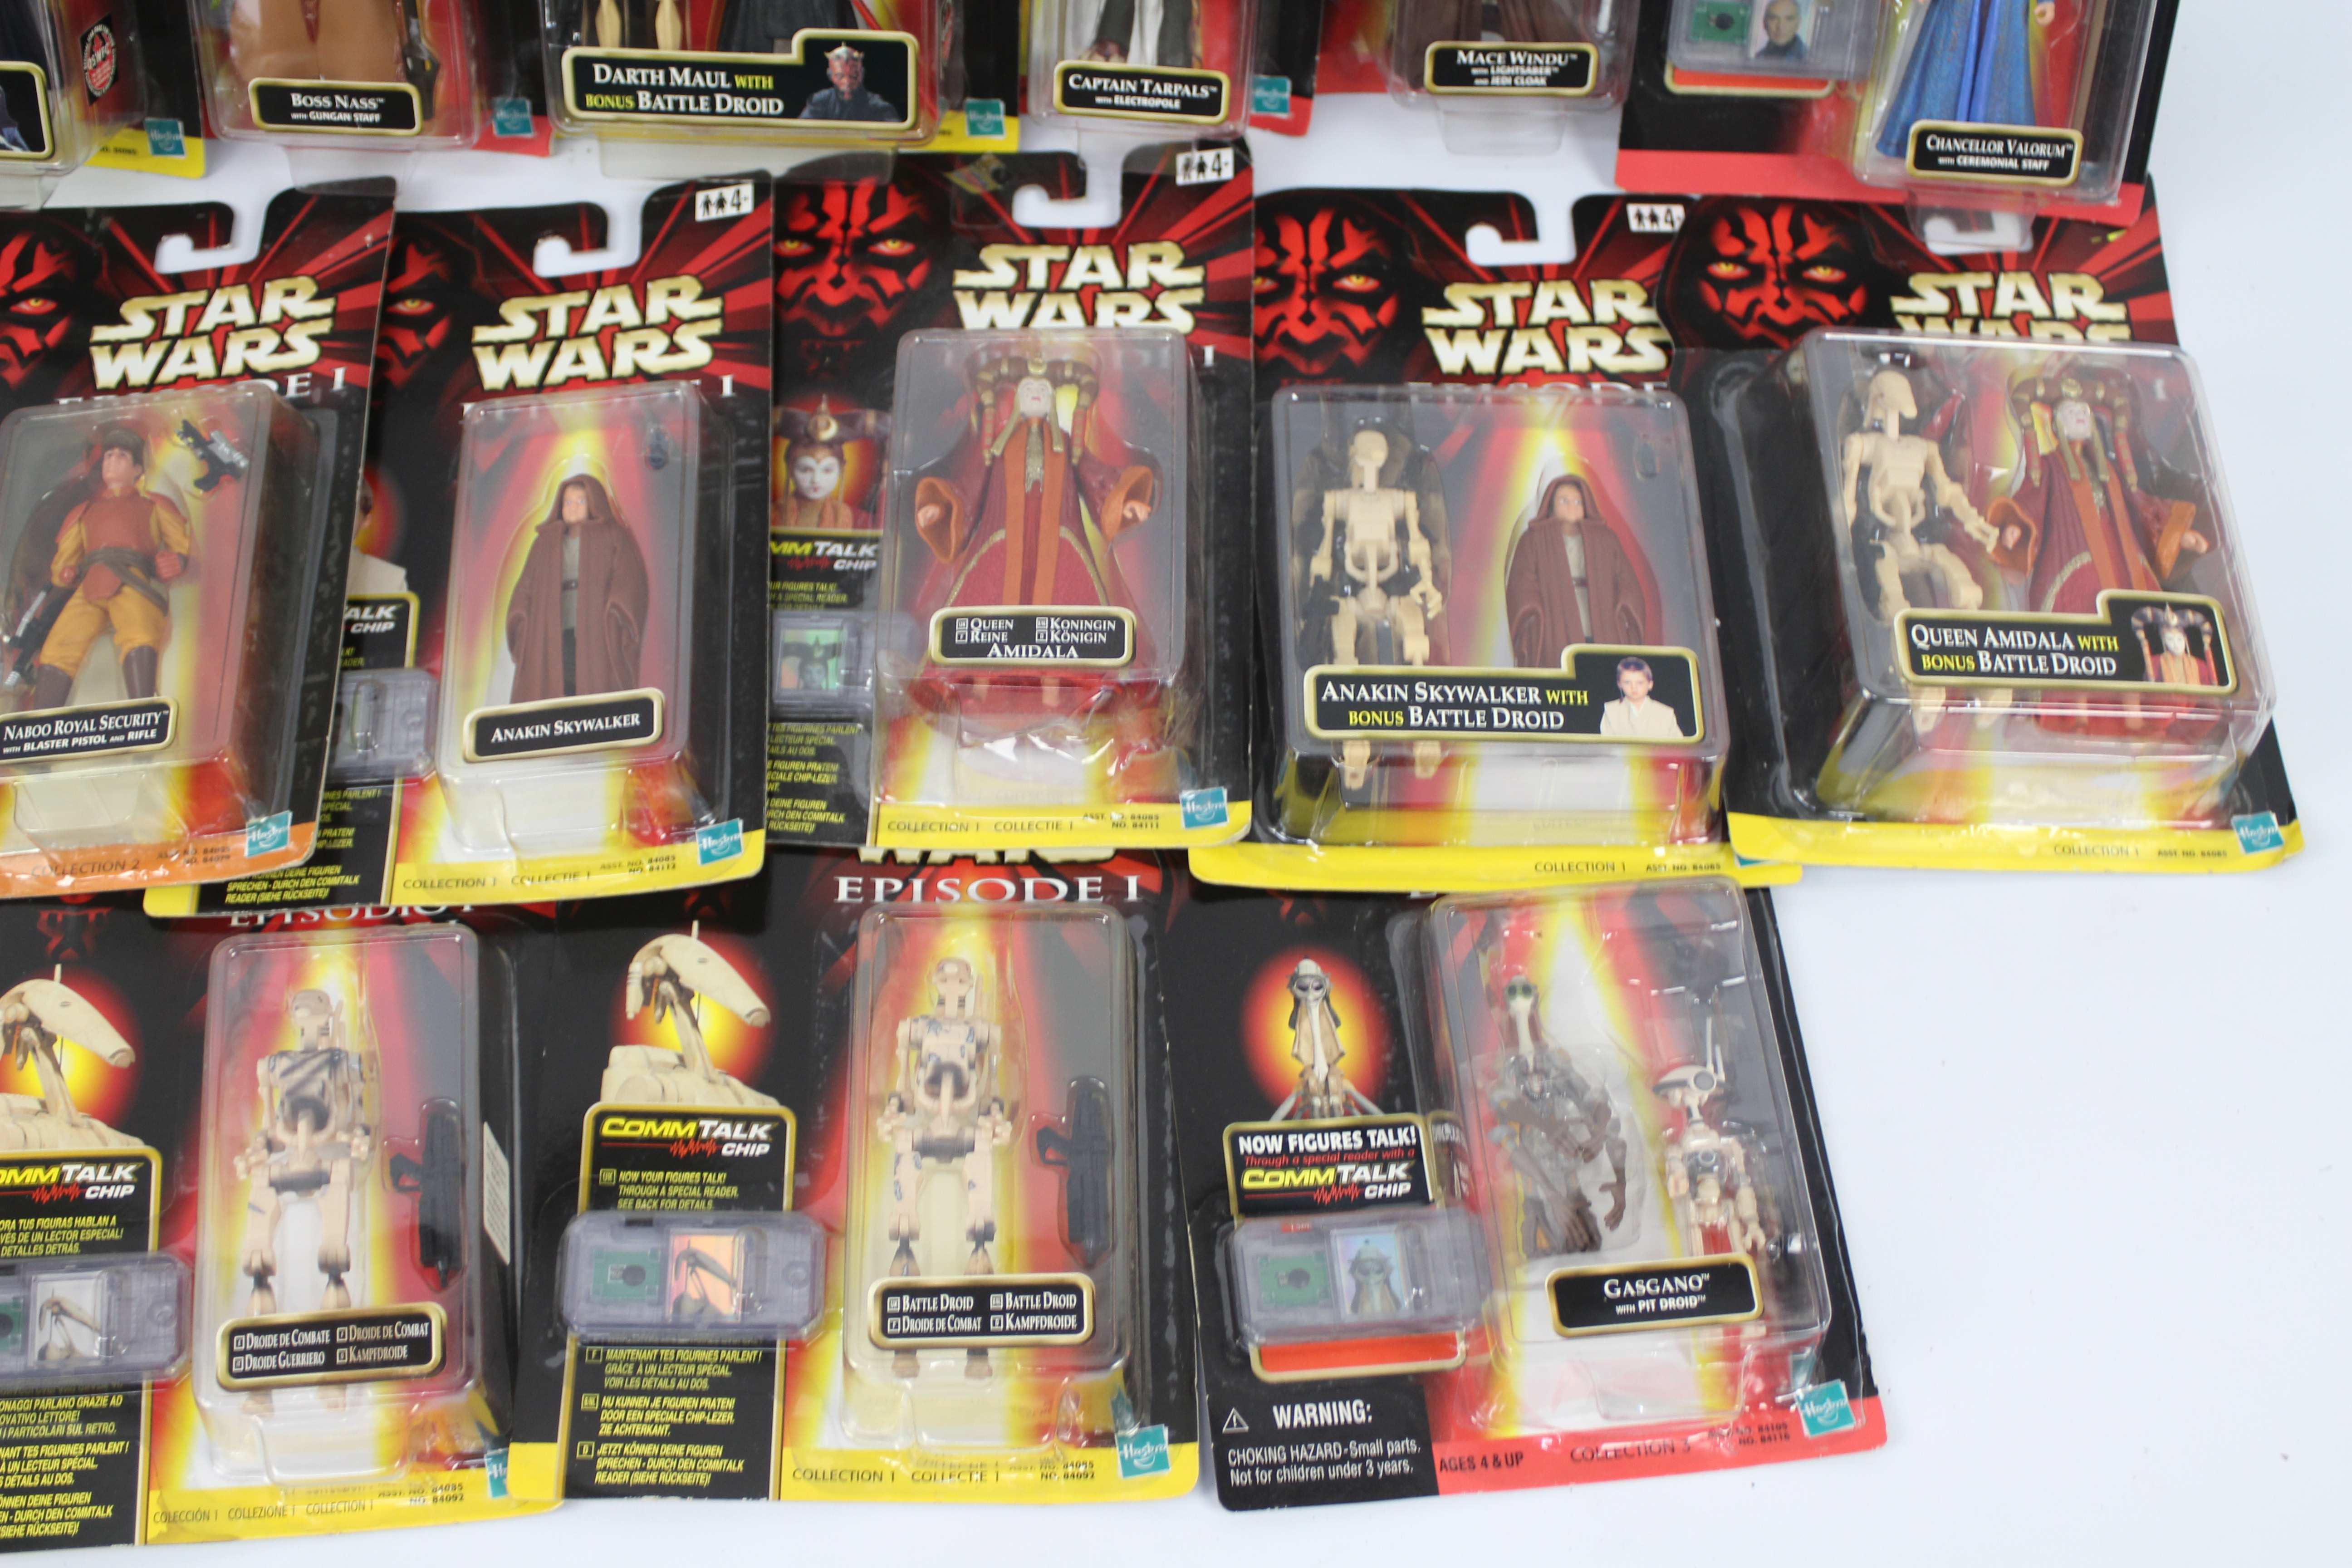 Hasbro, Star Wars - 20 carded modern Hasbro Star Wars Episode 1, 3.75" action figures. - Image 5 of 5